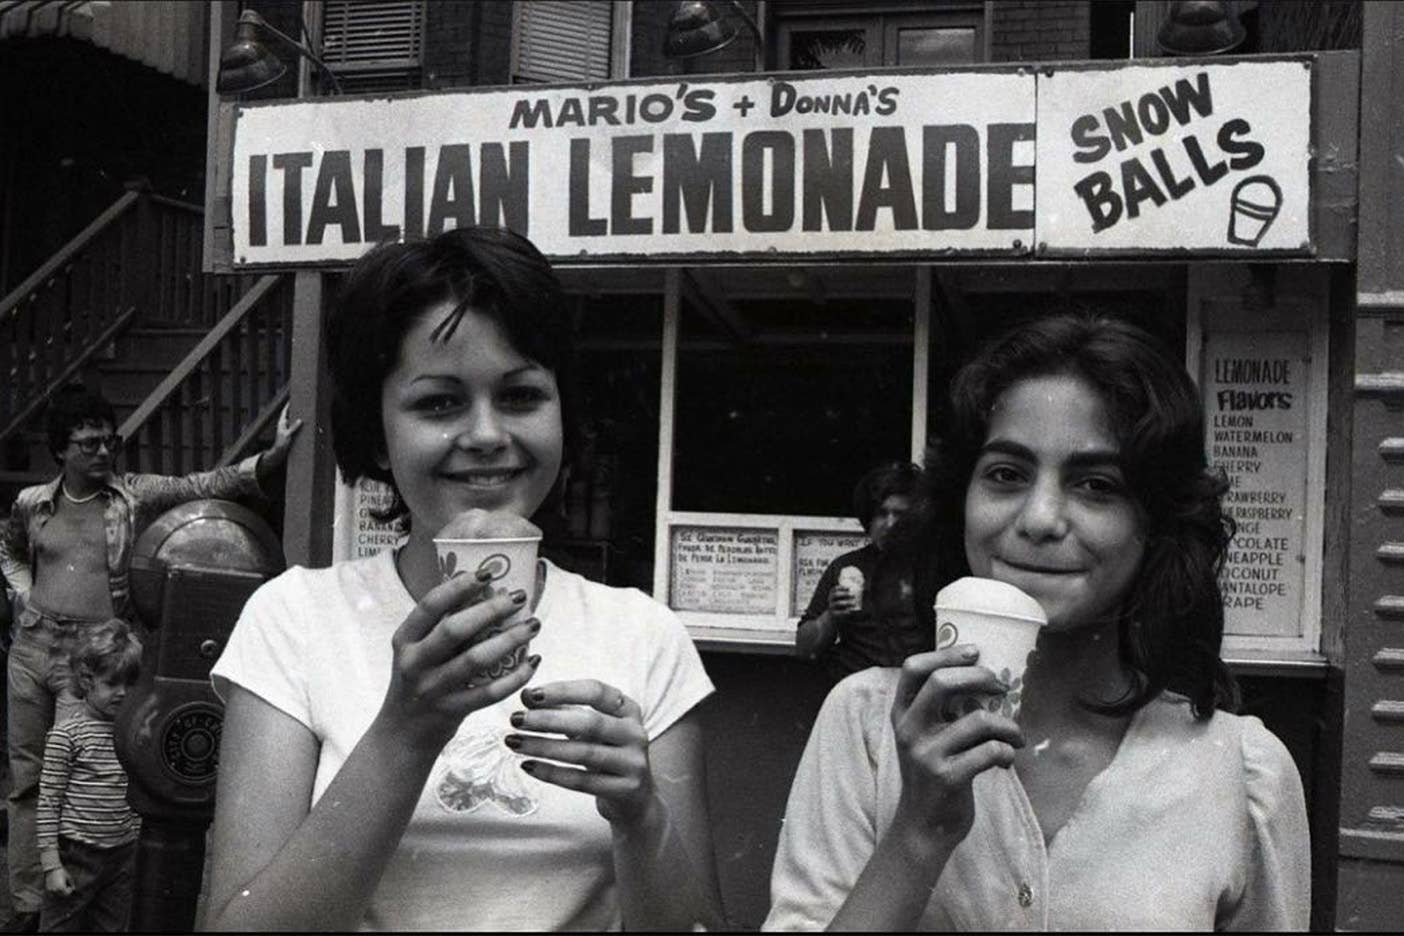 How This 1950s Lemonade Stand Became an Agent for Change